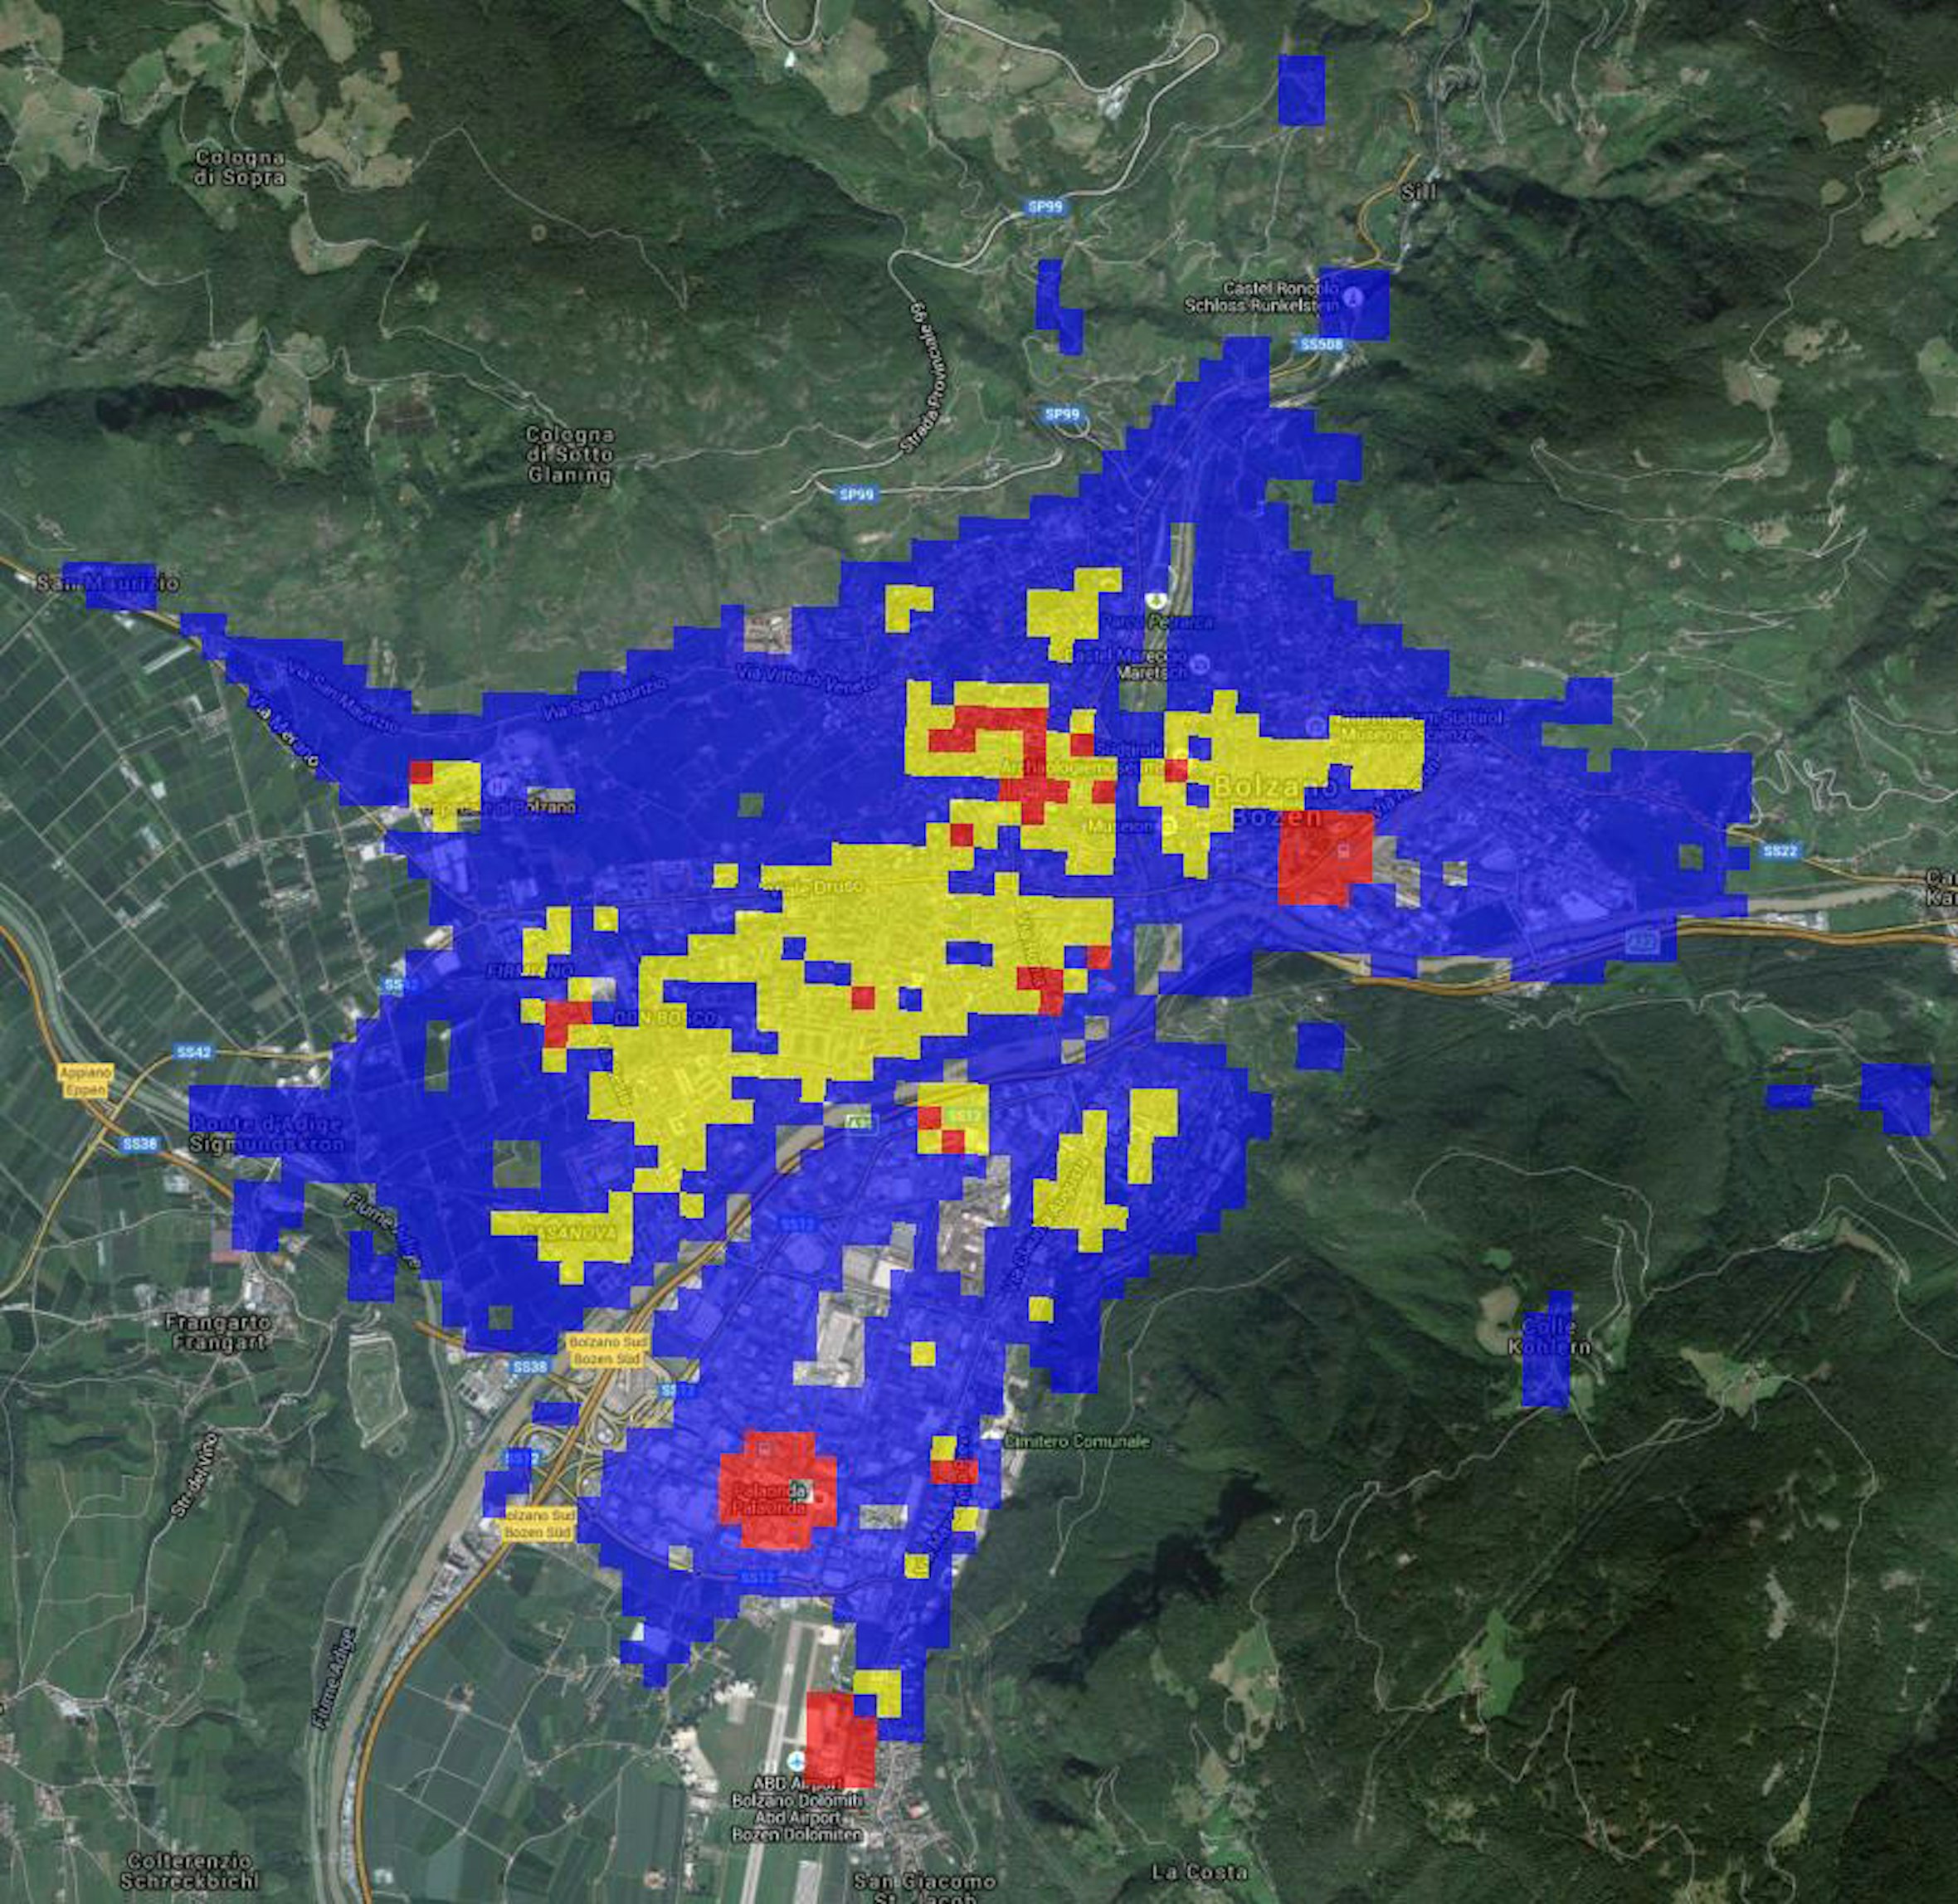 Areas of Bolzano most suitable for installing new electric car charging points